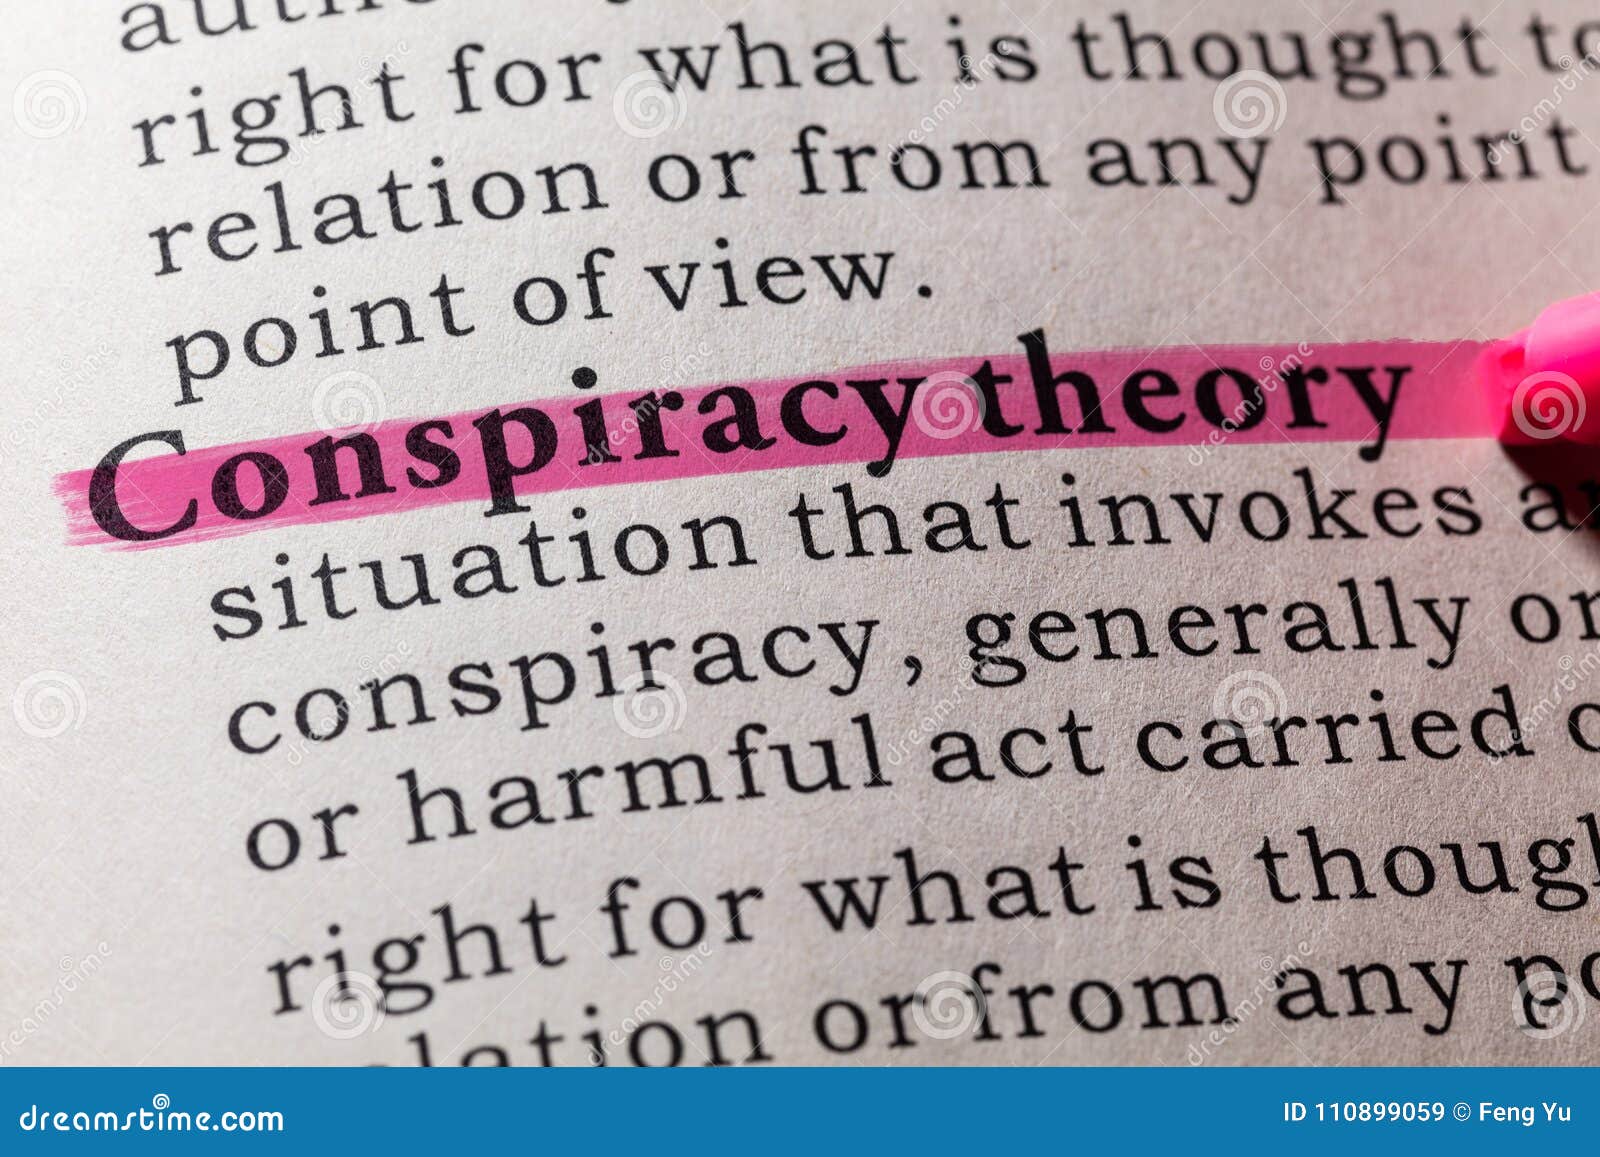 definition of conspiracy theory